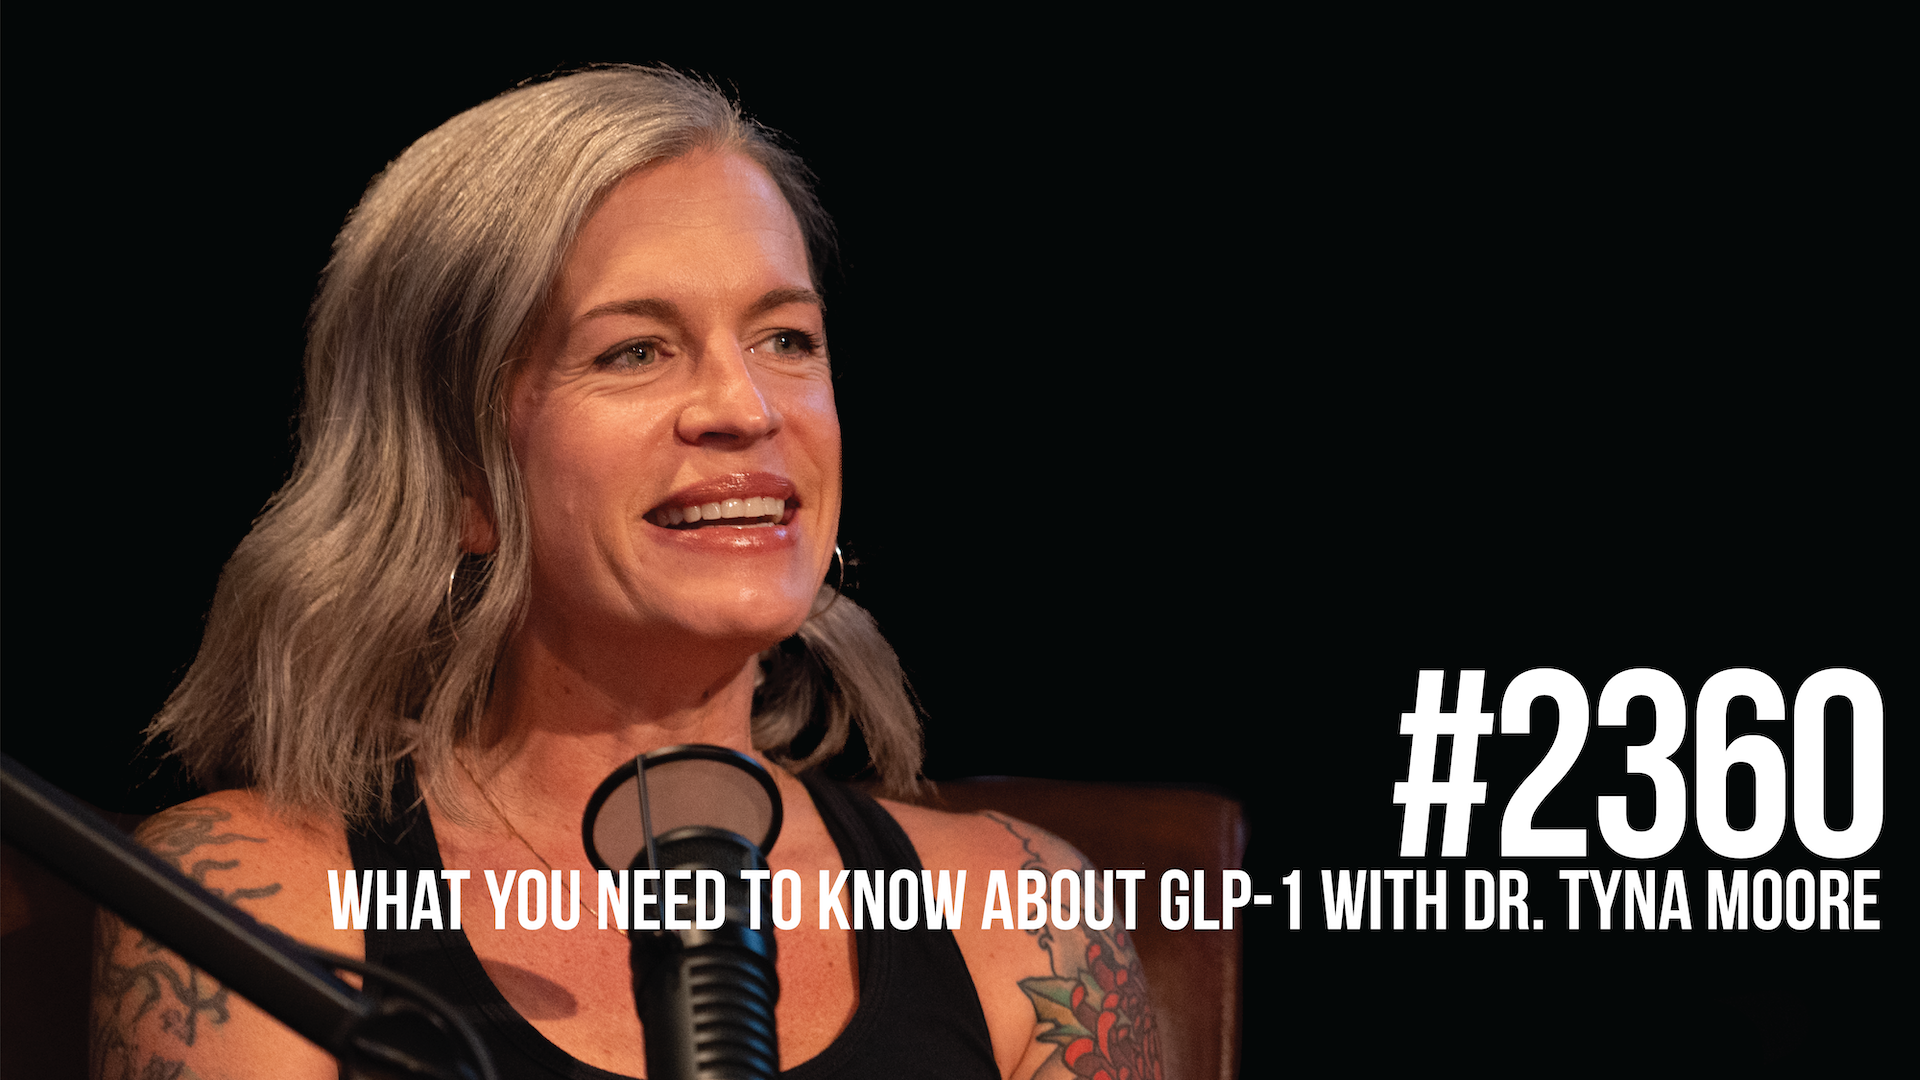 2360: What You Need to Know About GLP-1 With Dr. Tyna Moore